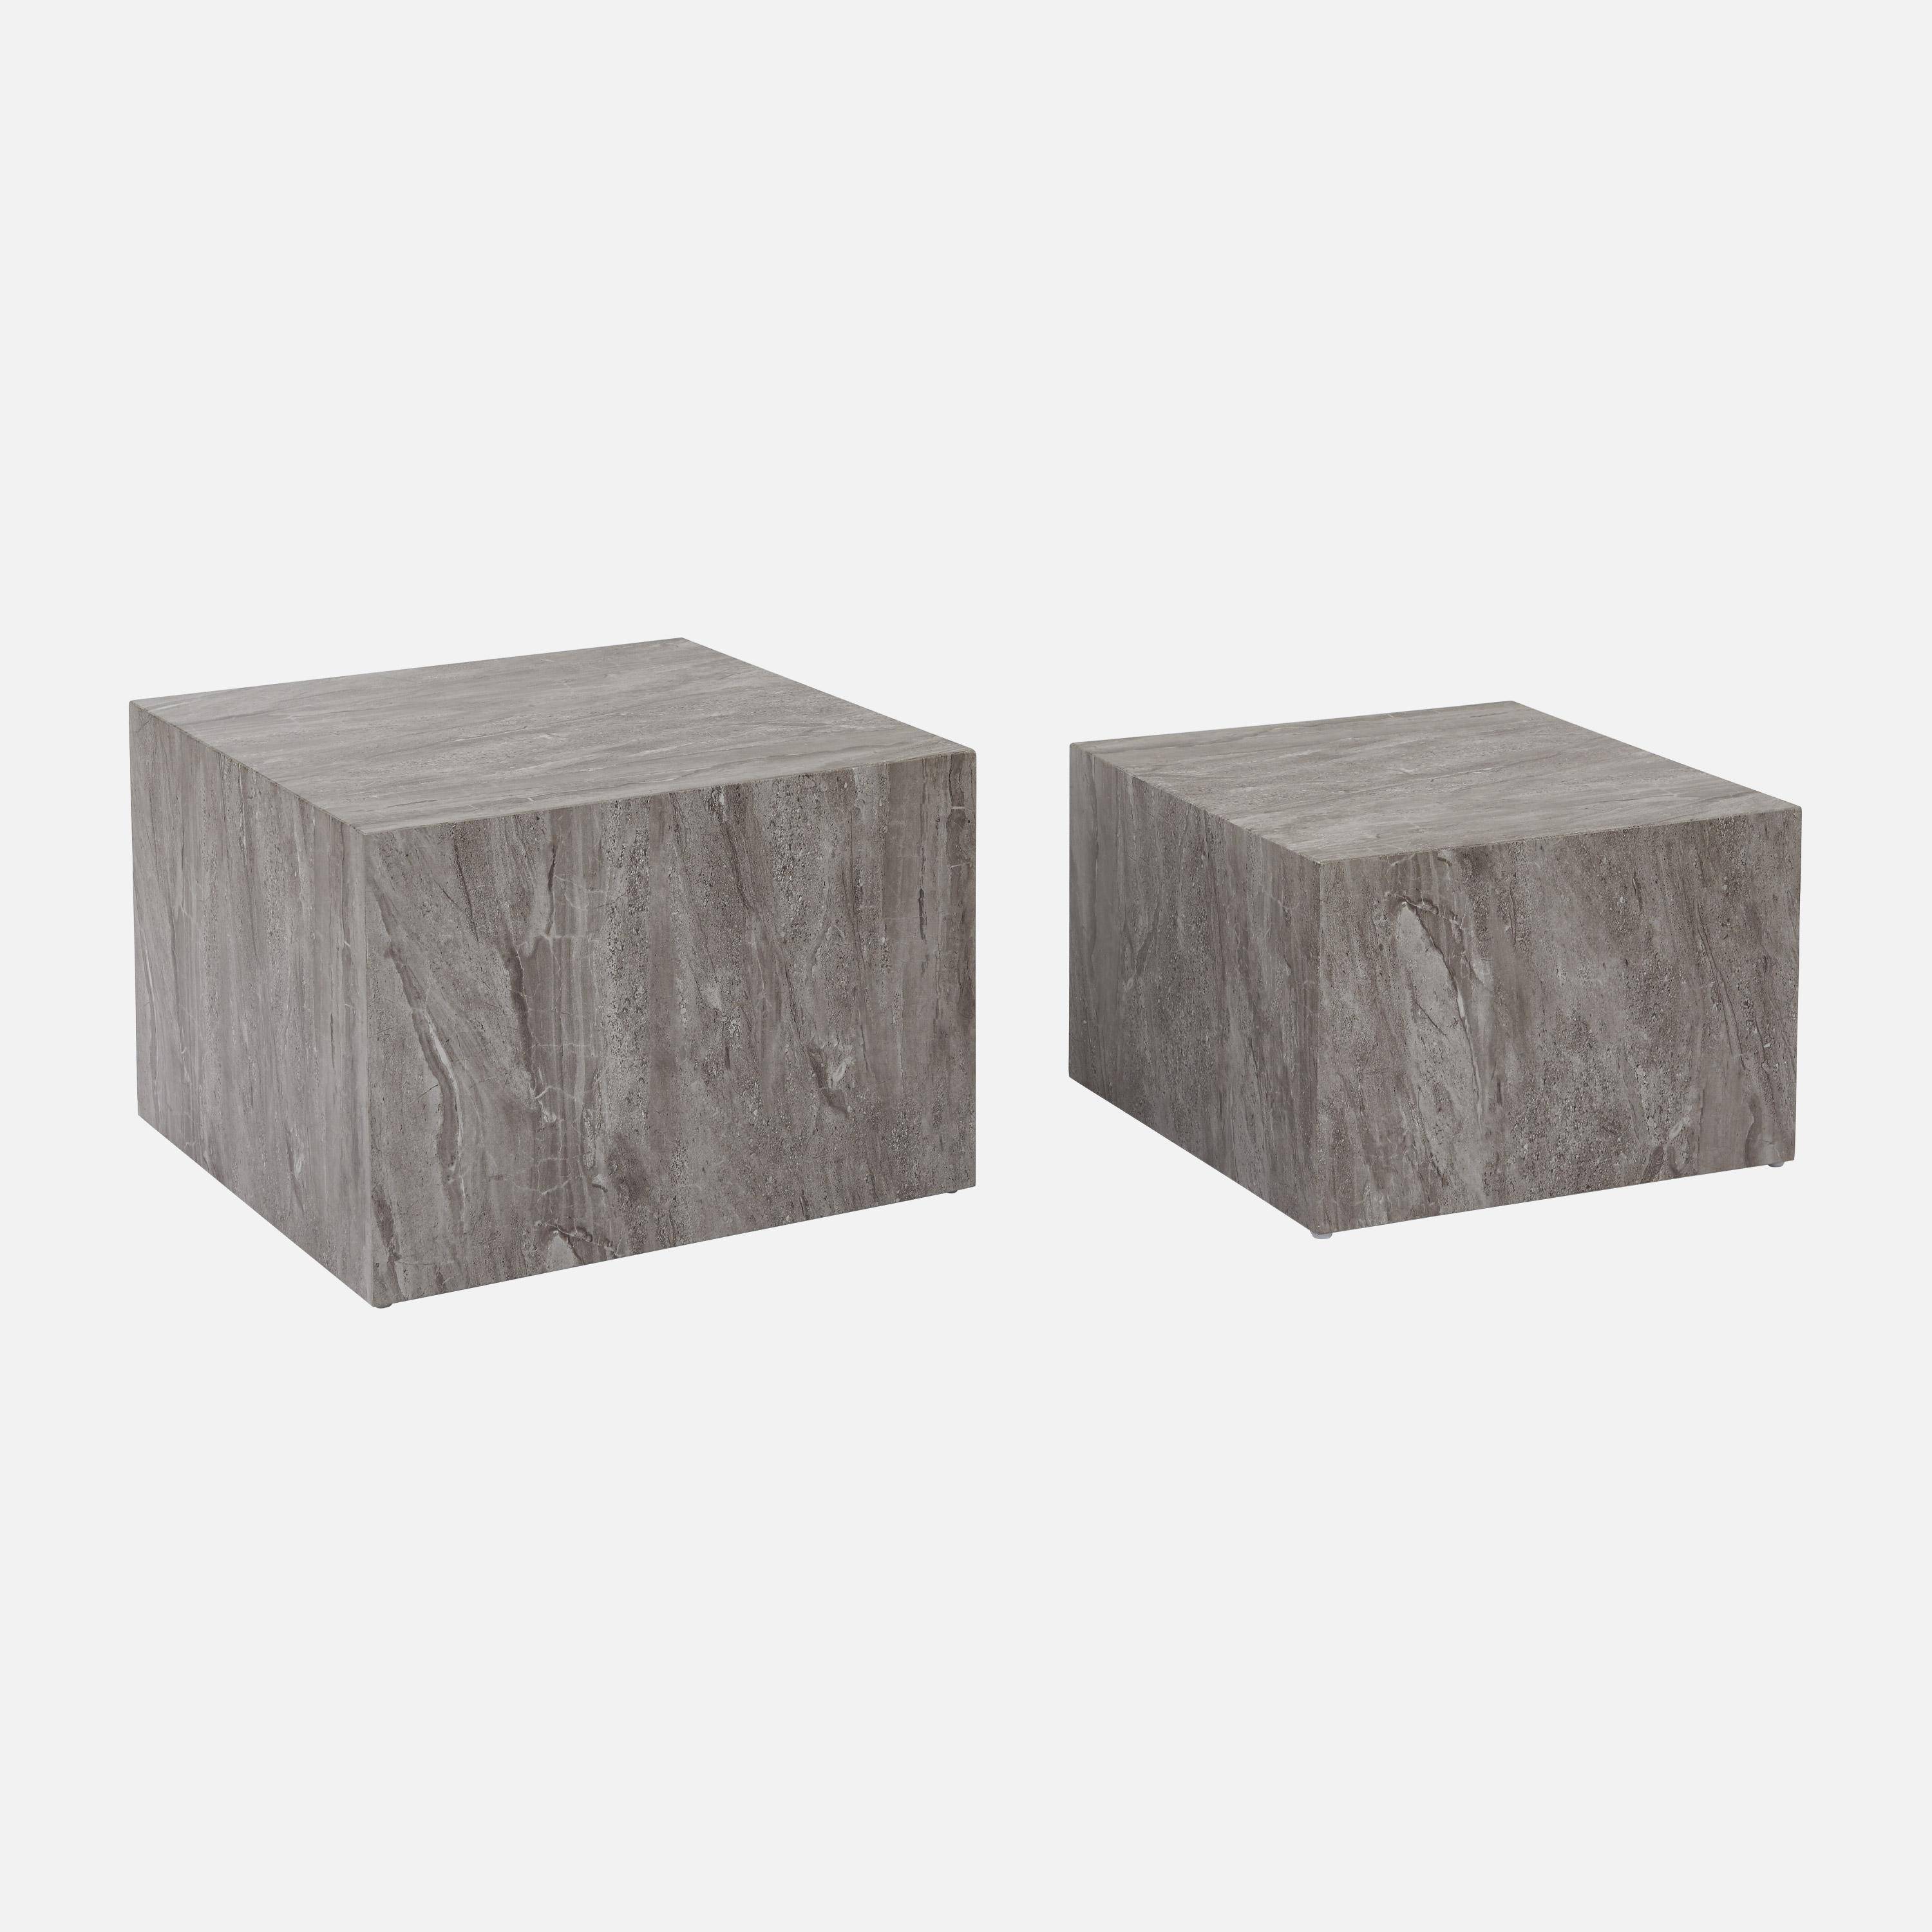 Set of 2 square coffee tables with marble effect, grey, L50xW50xH33cm &  L58xW58xH40cm, Paros,sweeek,Photo4